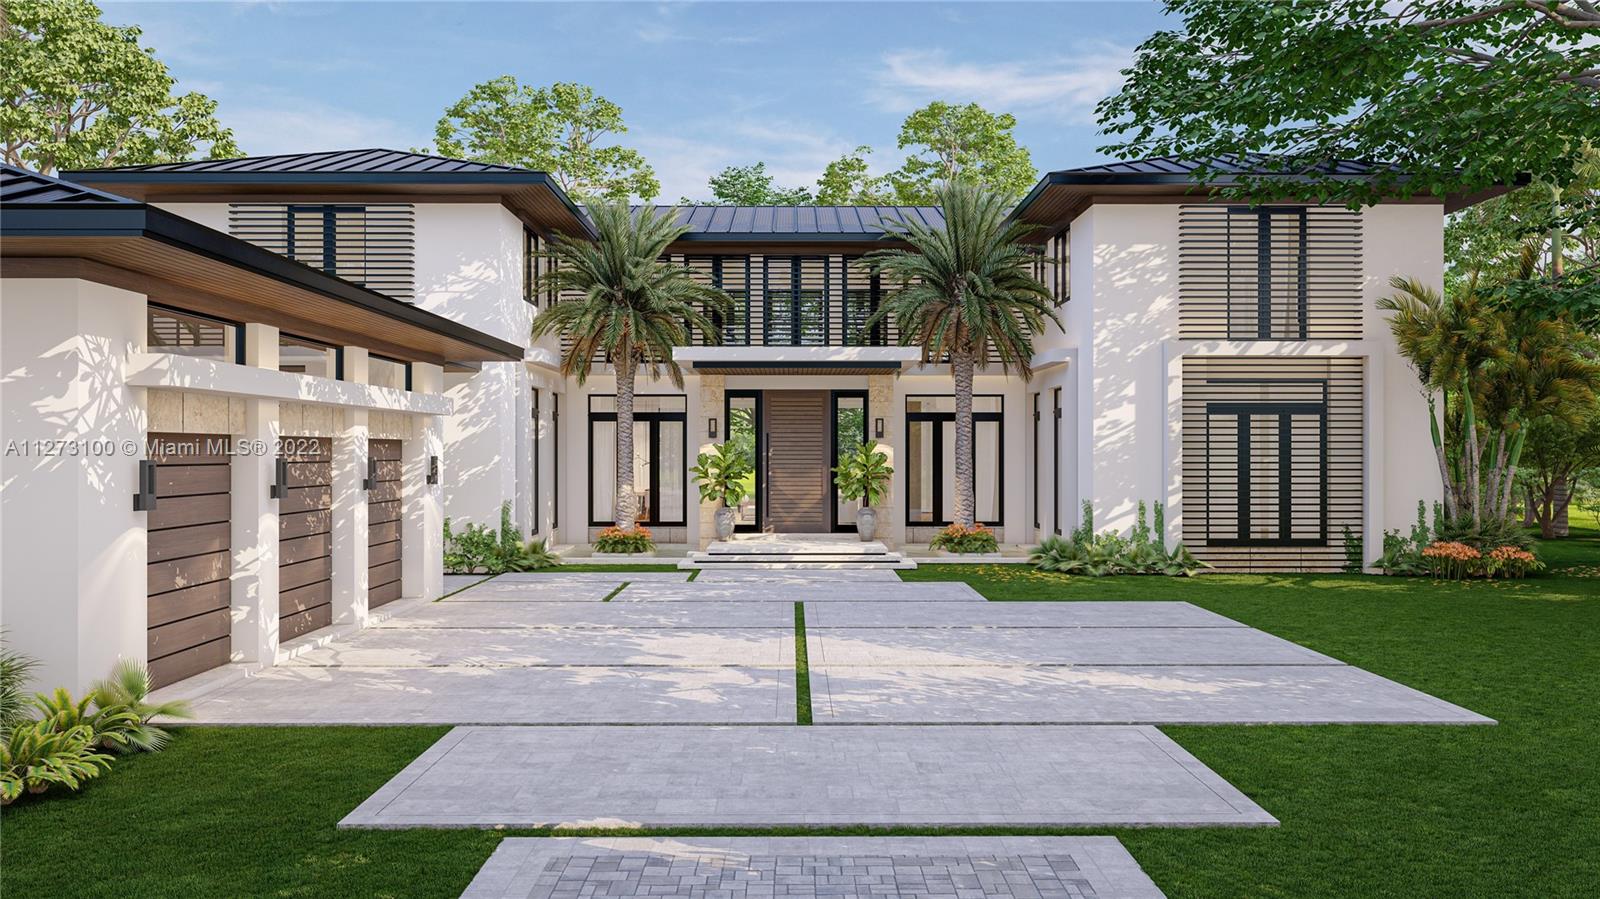 This gorgeous 11,599 Sq. Ft. home with 7 bedrooms, 7 full and 1 half bathrooms will be known as “Villa Lusso,” as it will combine both traditional and modern elements to create an elegant, streamlined design with bright open living areas. The eat-in kitchen will have Mia Cucina cabinets, Wolf and SubZero appliances. The main suite will include a sitting area, lavish bathroom, and spacious walk-in closets.  Outdoor spaces will feature a beautiful pool, gazebo with a summer kitchen, and tropical landscaping for total tranquility. Additional amenities include a media room, spa, and game room.  Textured natural stone and wood, with  impeccable interior designs by Sensi Casa throughout, state-of-the-art electronics and security system. Close to excellent schools, restaurants and shopping.